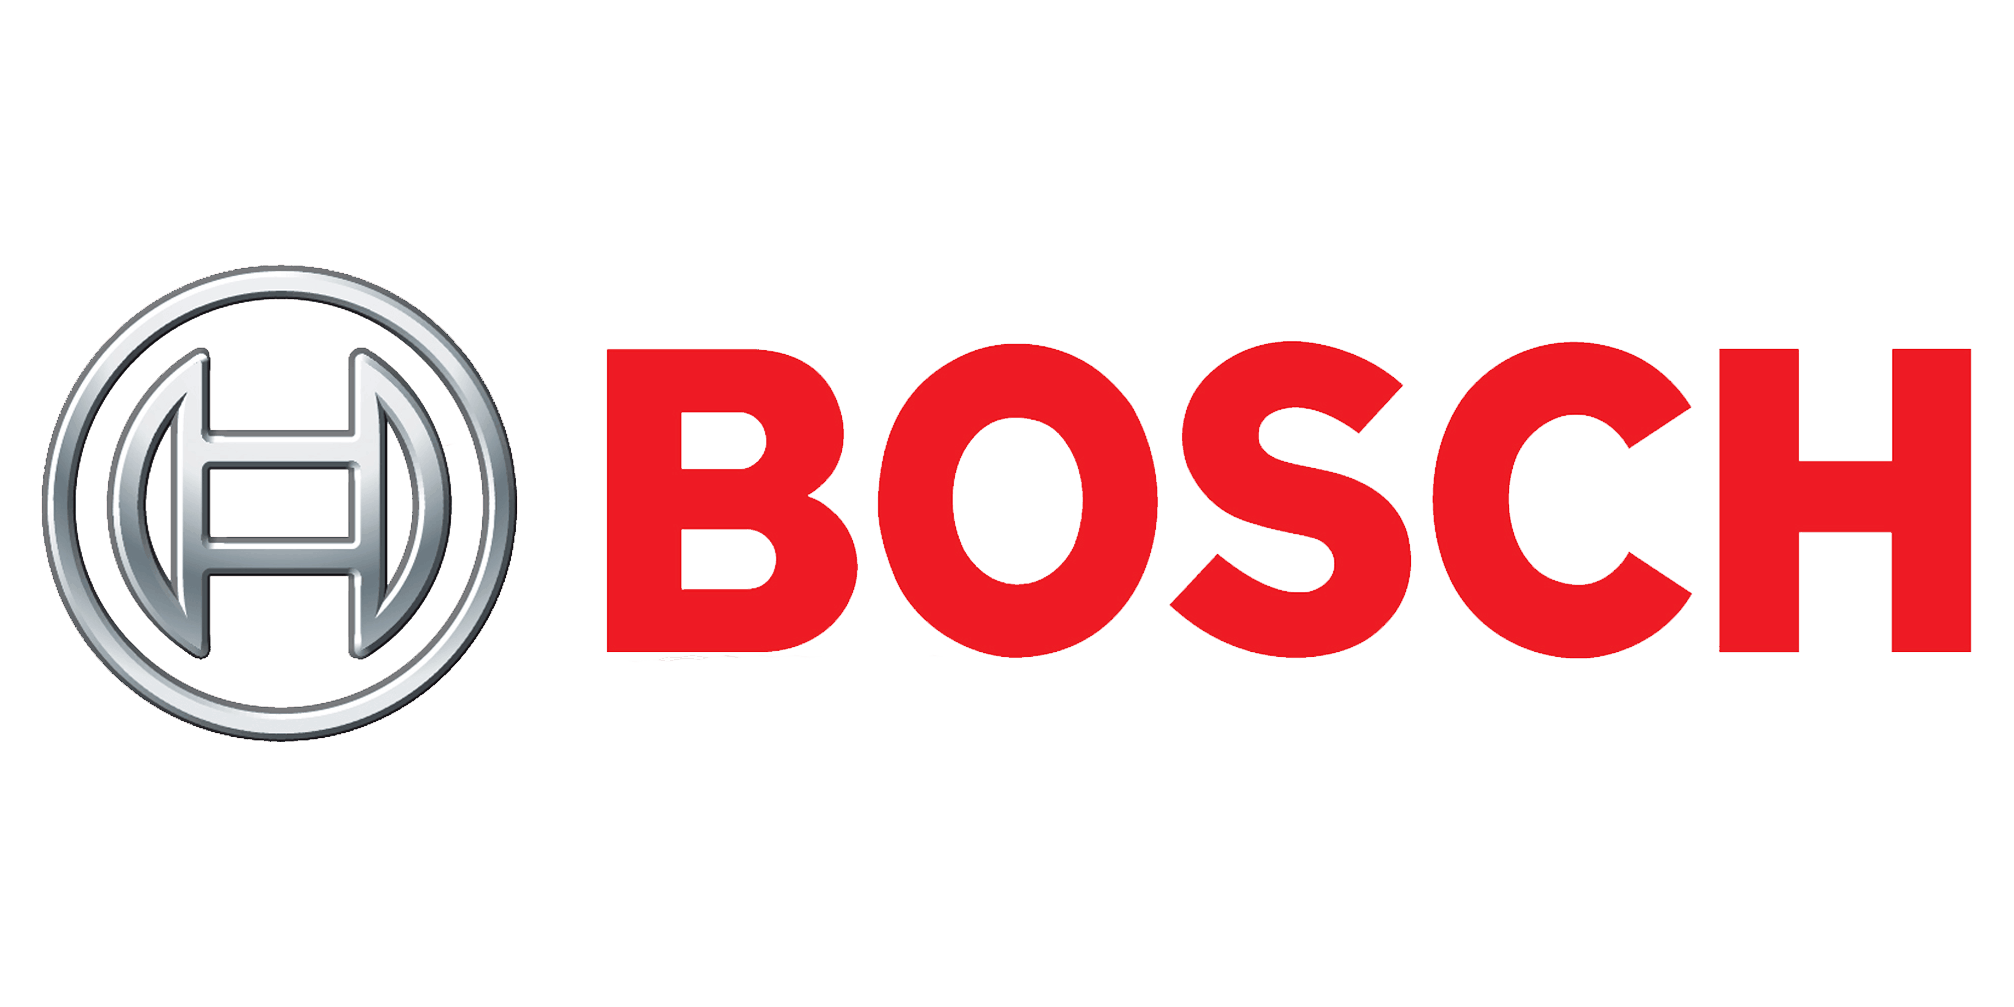 Bosch May Bring Production From UK To Hungary